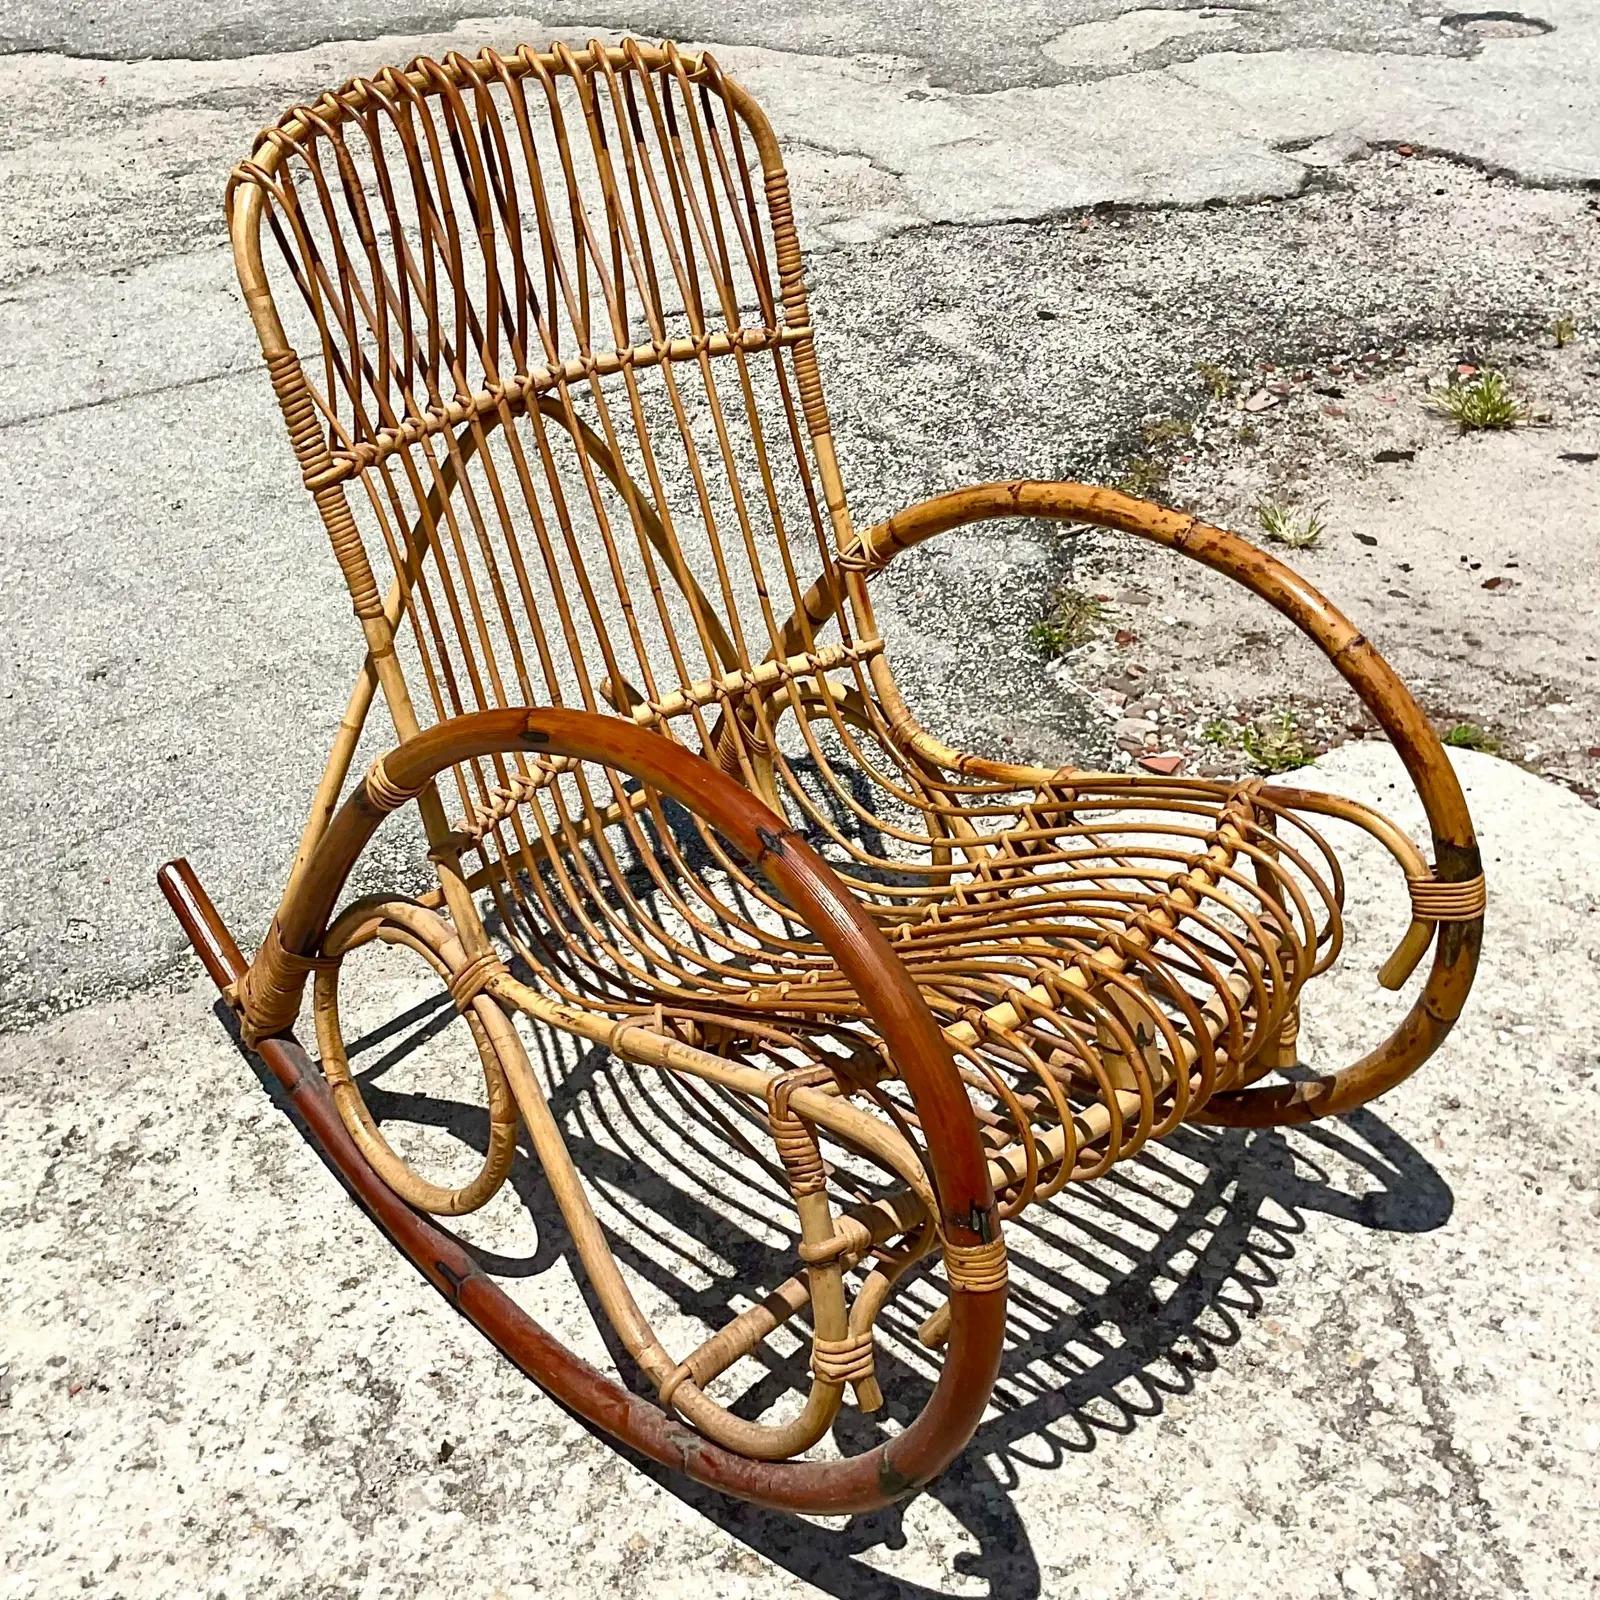 Fabulous vintage Coastal rocking chairs. Beautiful bent rattan in two shades of brown. Acquired from a Palm Beach estate.